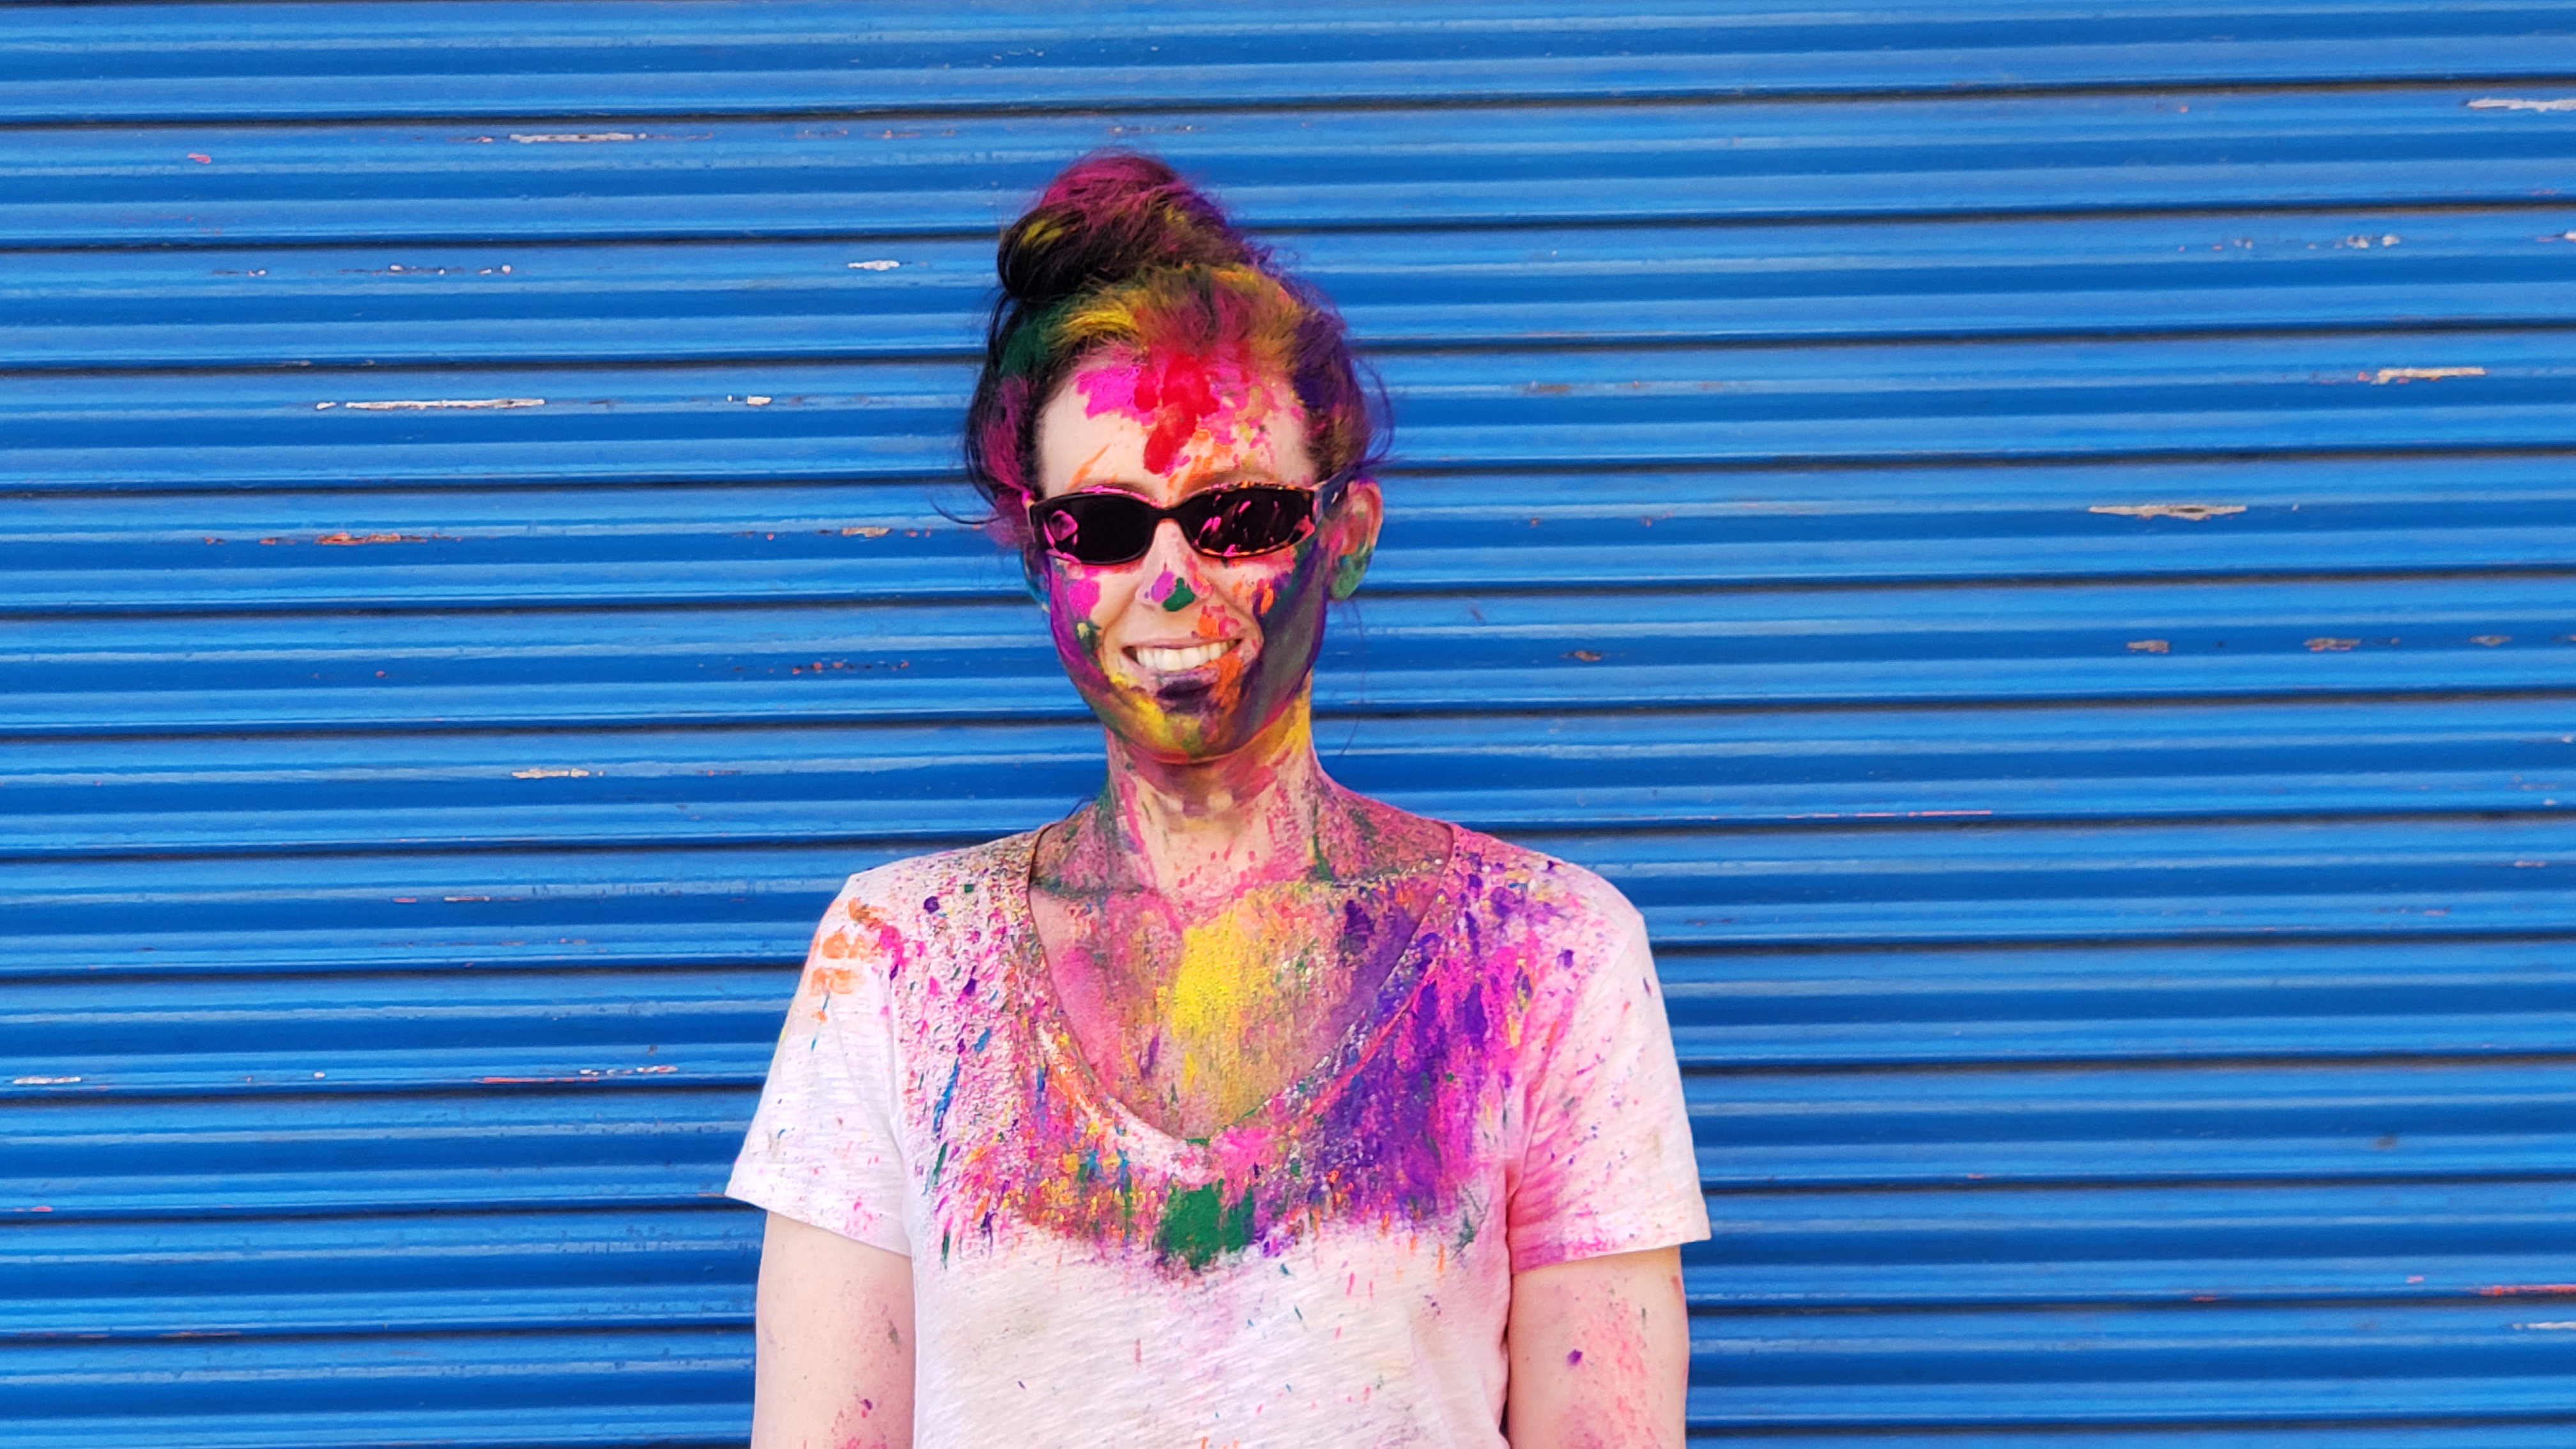 Your-Essential-Guide-To-Celebrating-The-Holi-Festival-In-India